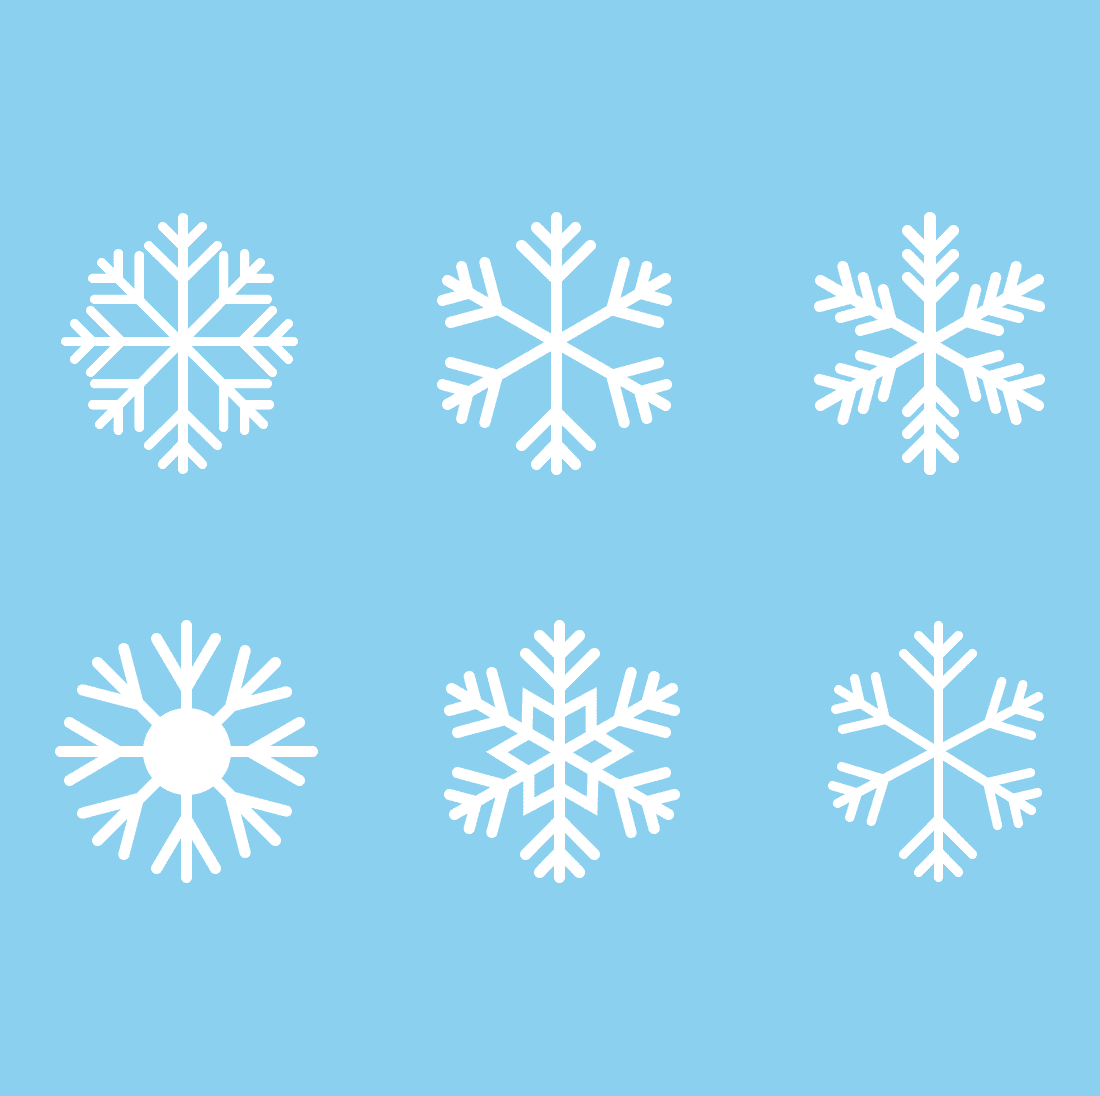 Diverse of snowflakes on a blue background.